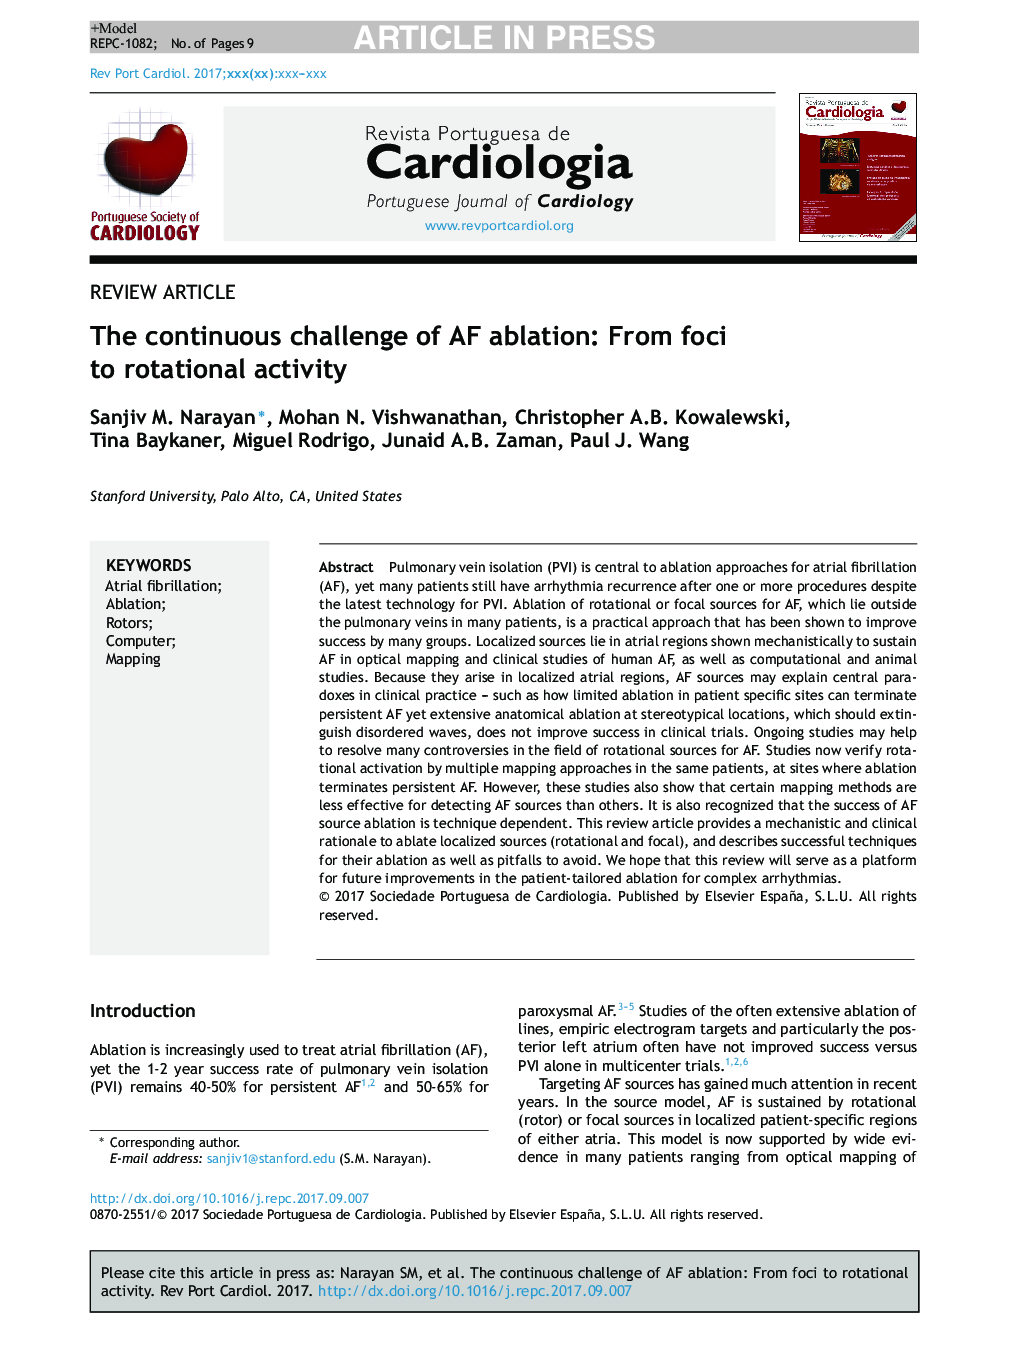 The continuous challenge of AF ablation: From foci to rotational activity